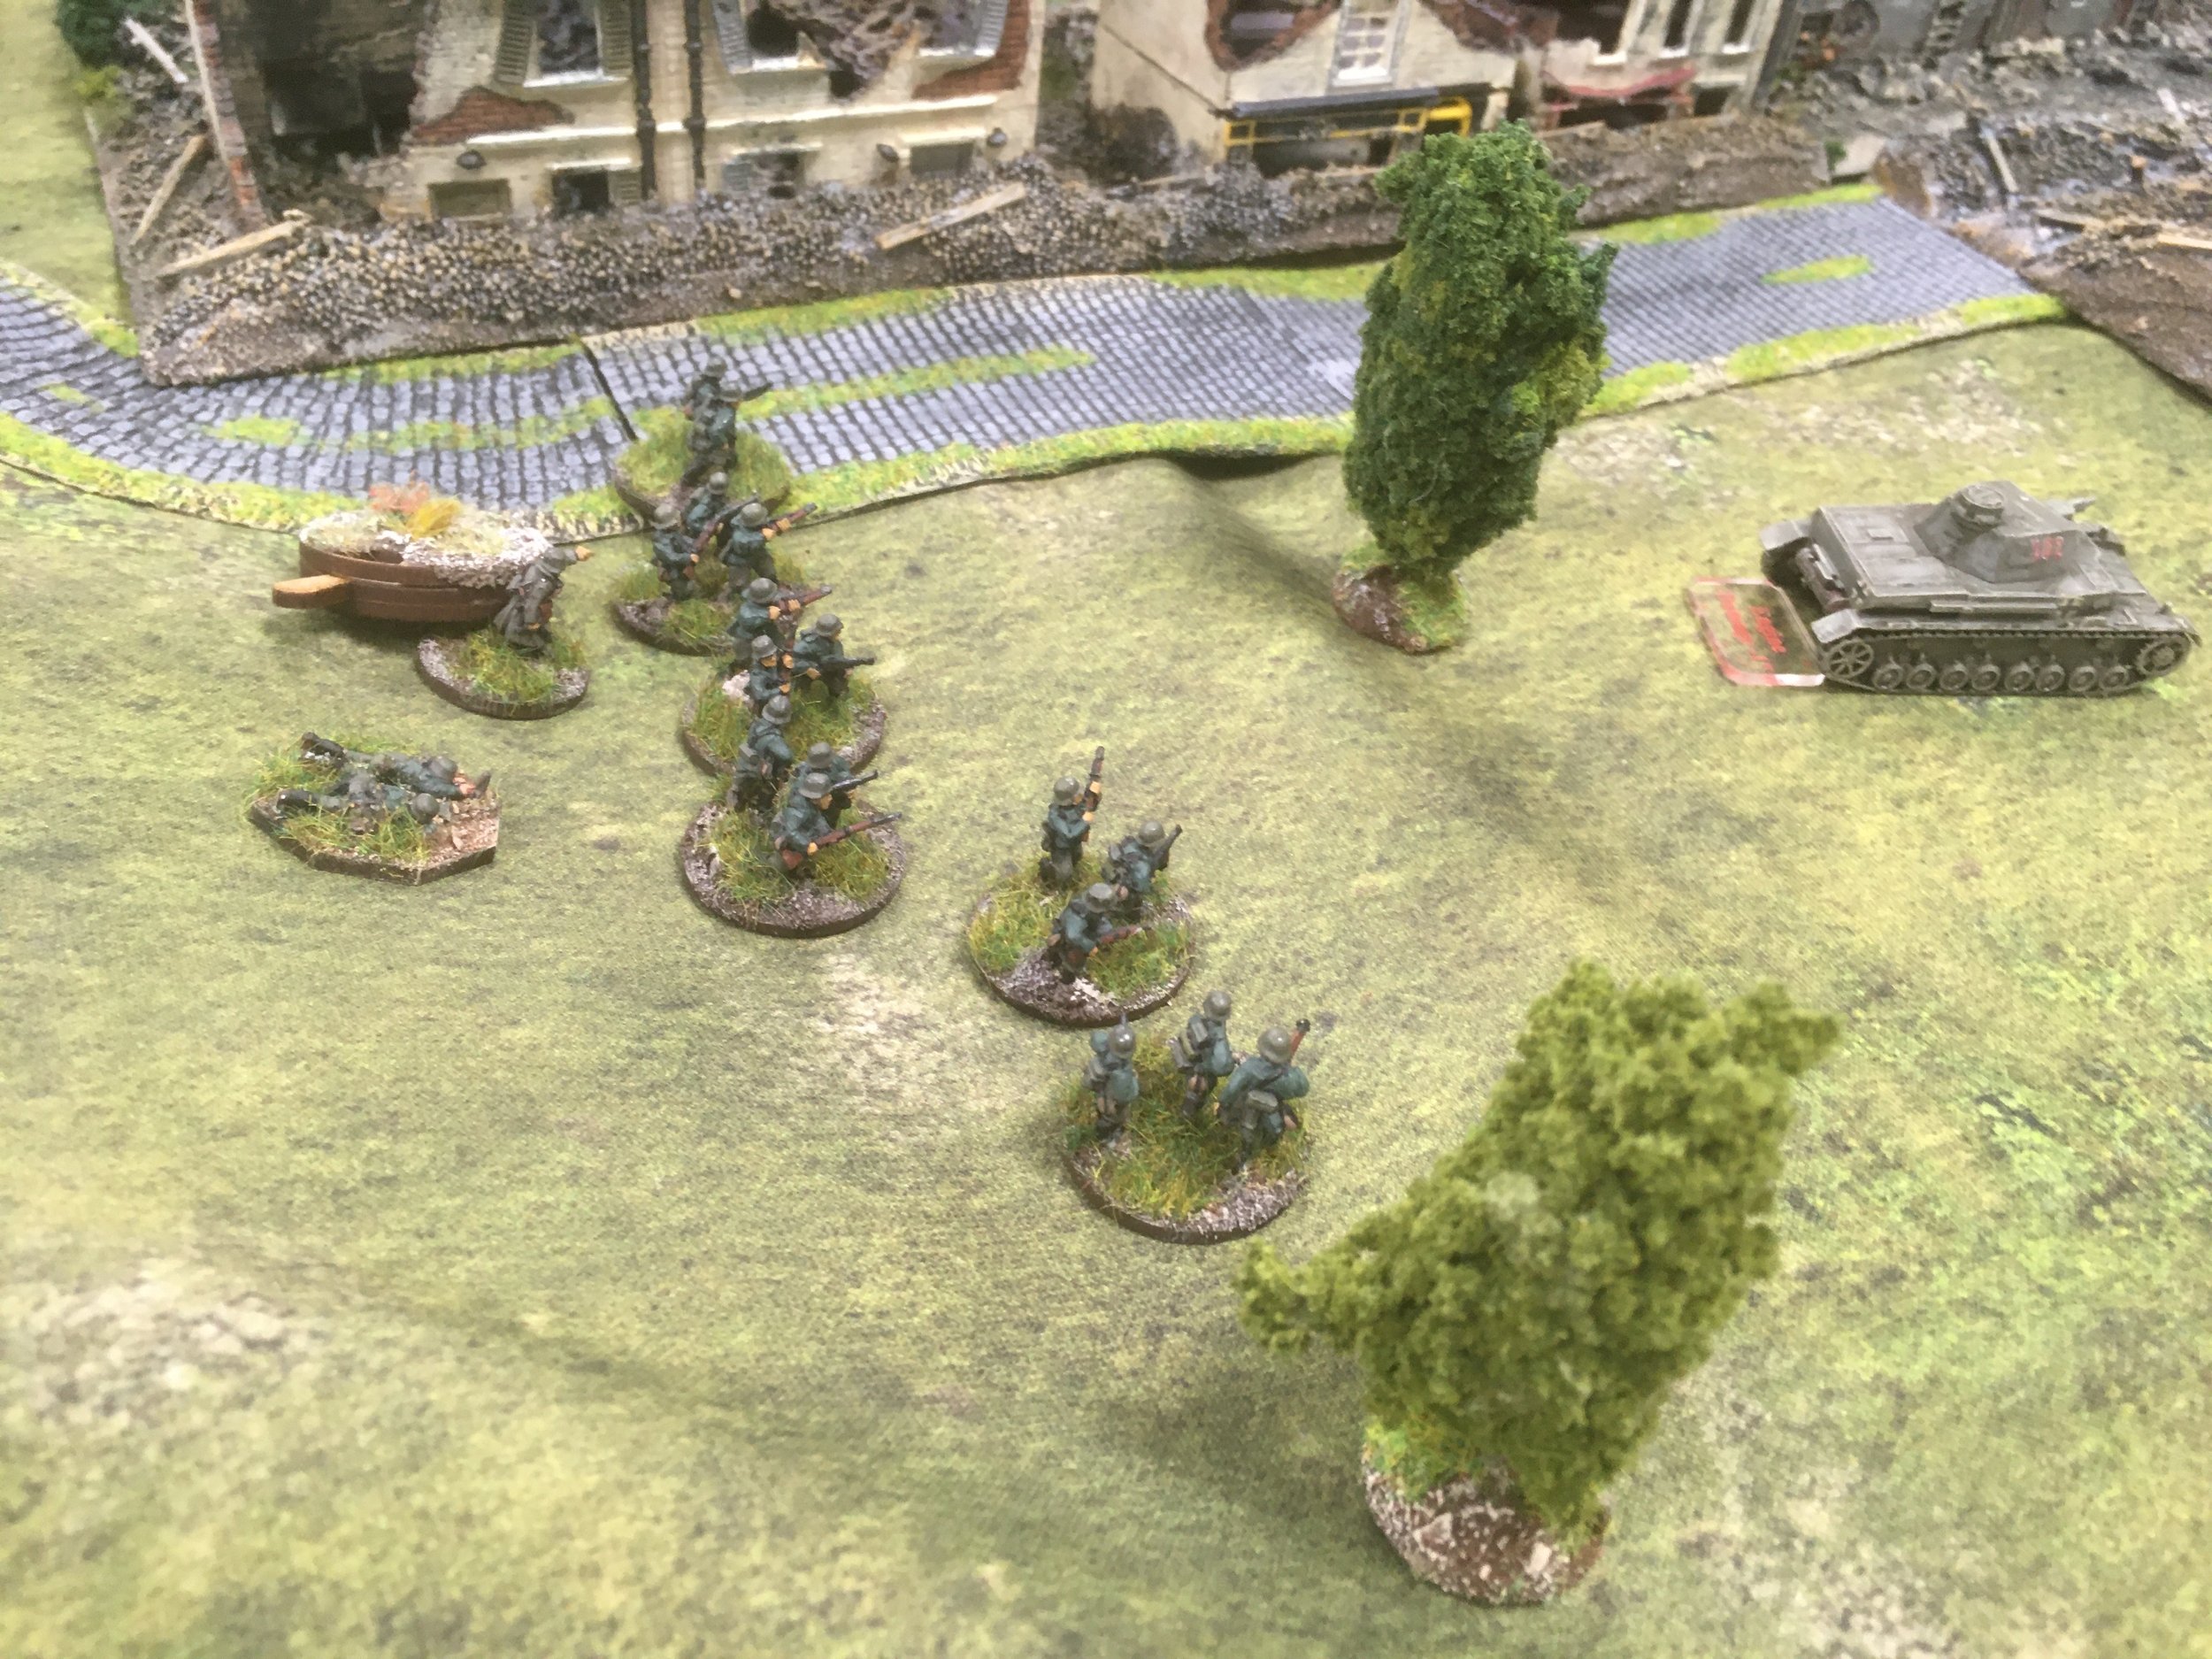 Emboldened by the French infantry retreat the German motorcycle units advance forwards again.